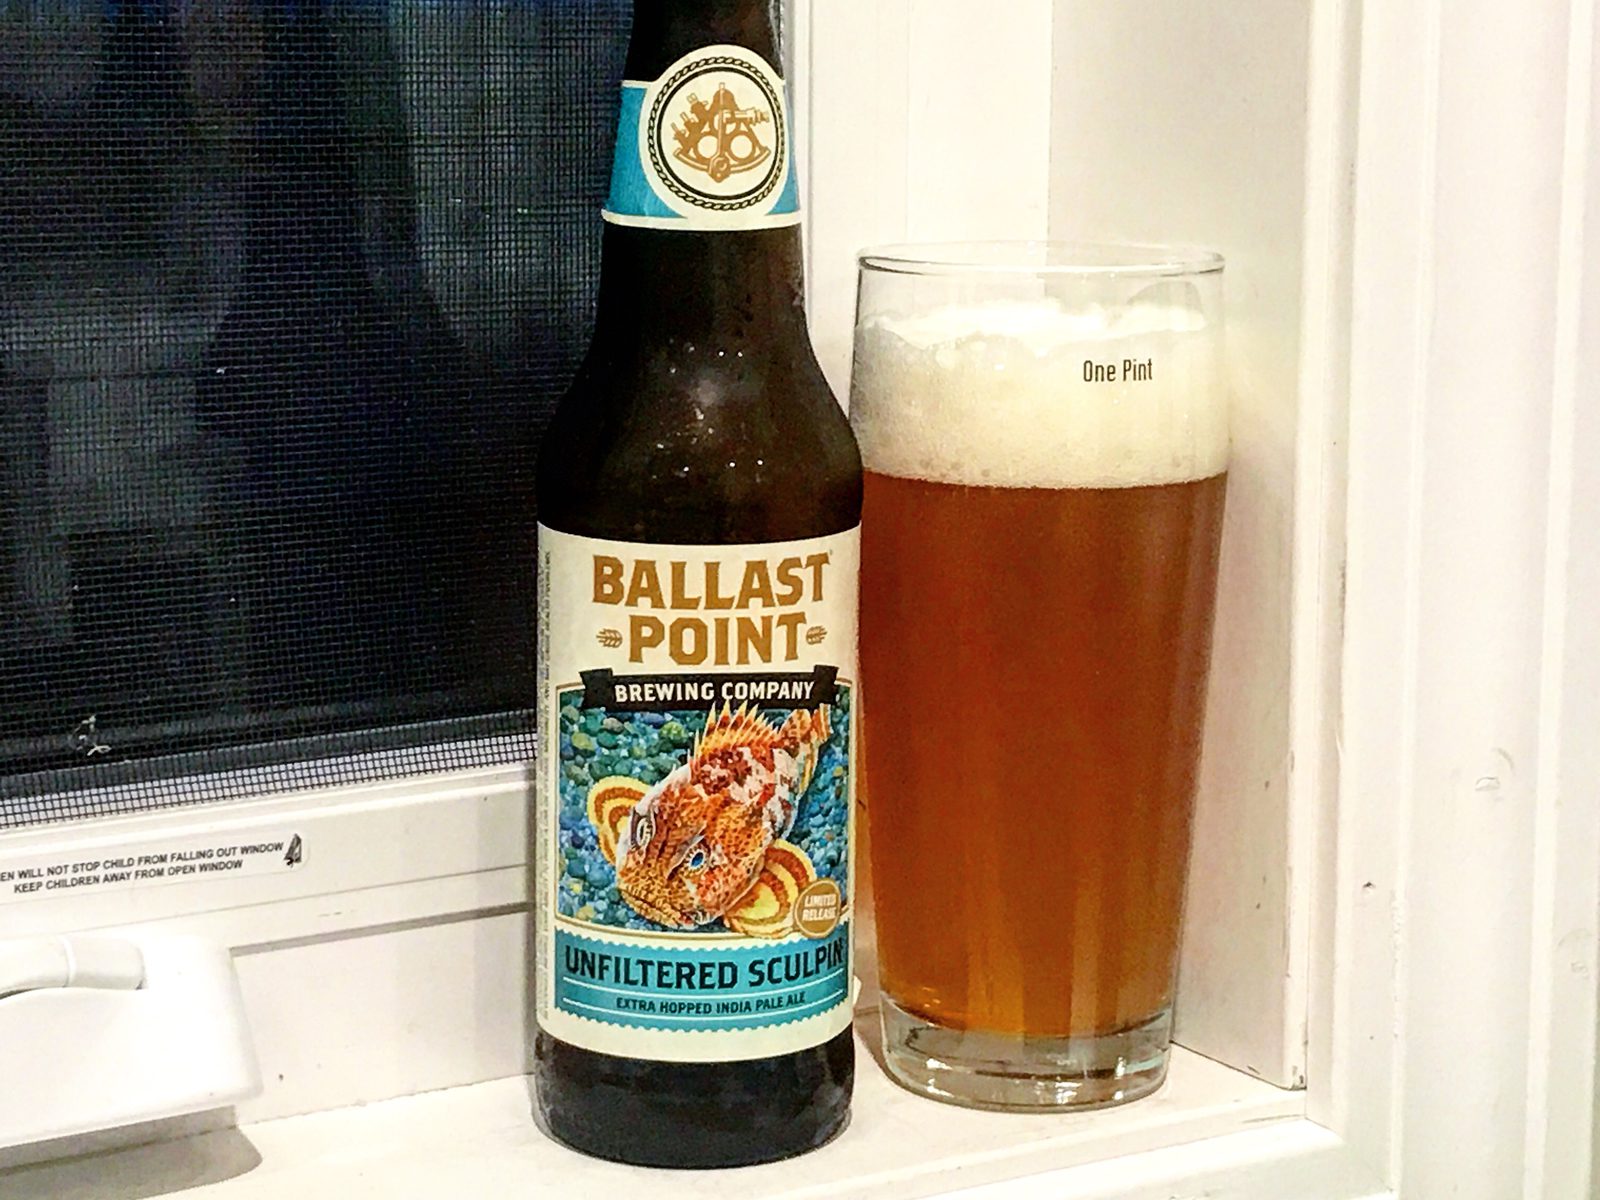 Ballast Point Brewing Company: Unfiltered Sculpin